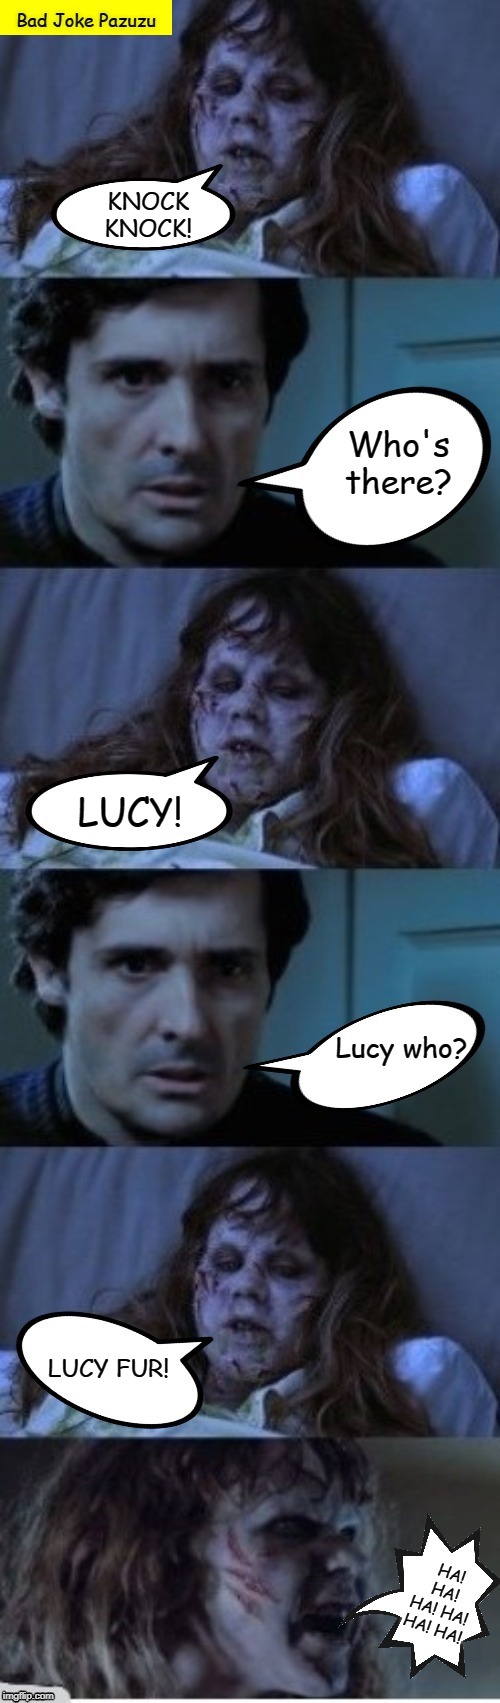 Bad Joke Pazuzu | KNOCK KNOCK! Who's there? LUCY! Lucy who? LUCY FUR! | image tagged in bad joke pazuzu,the exorcist,memes | made w/ Imgflip meme maker